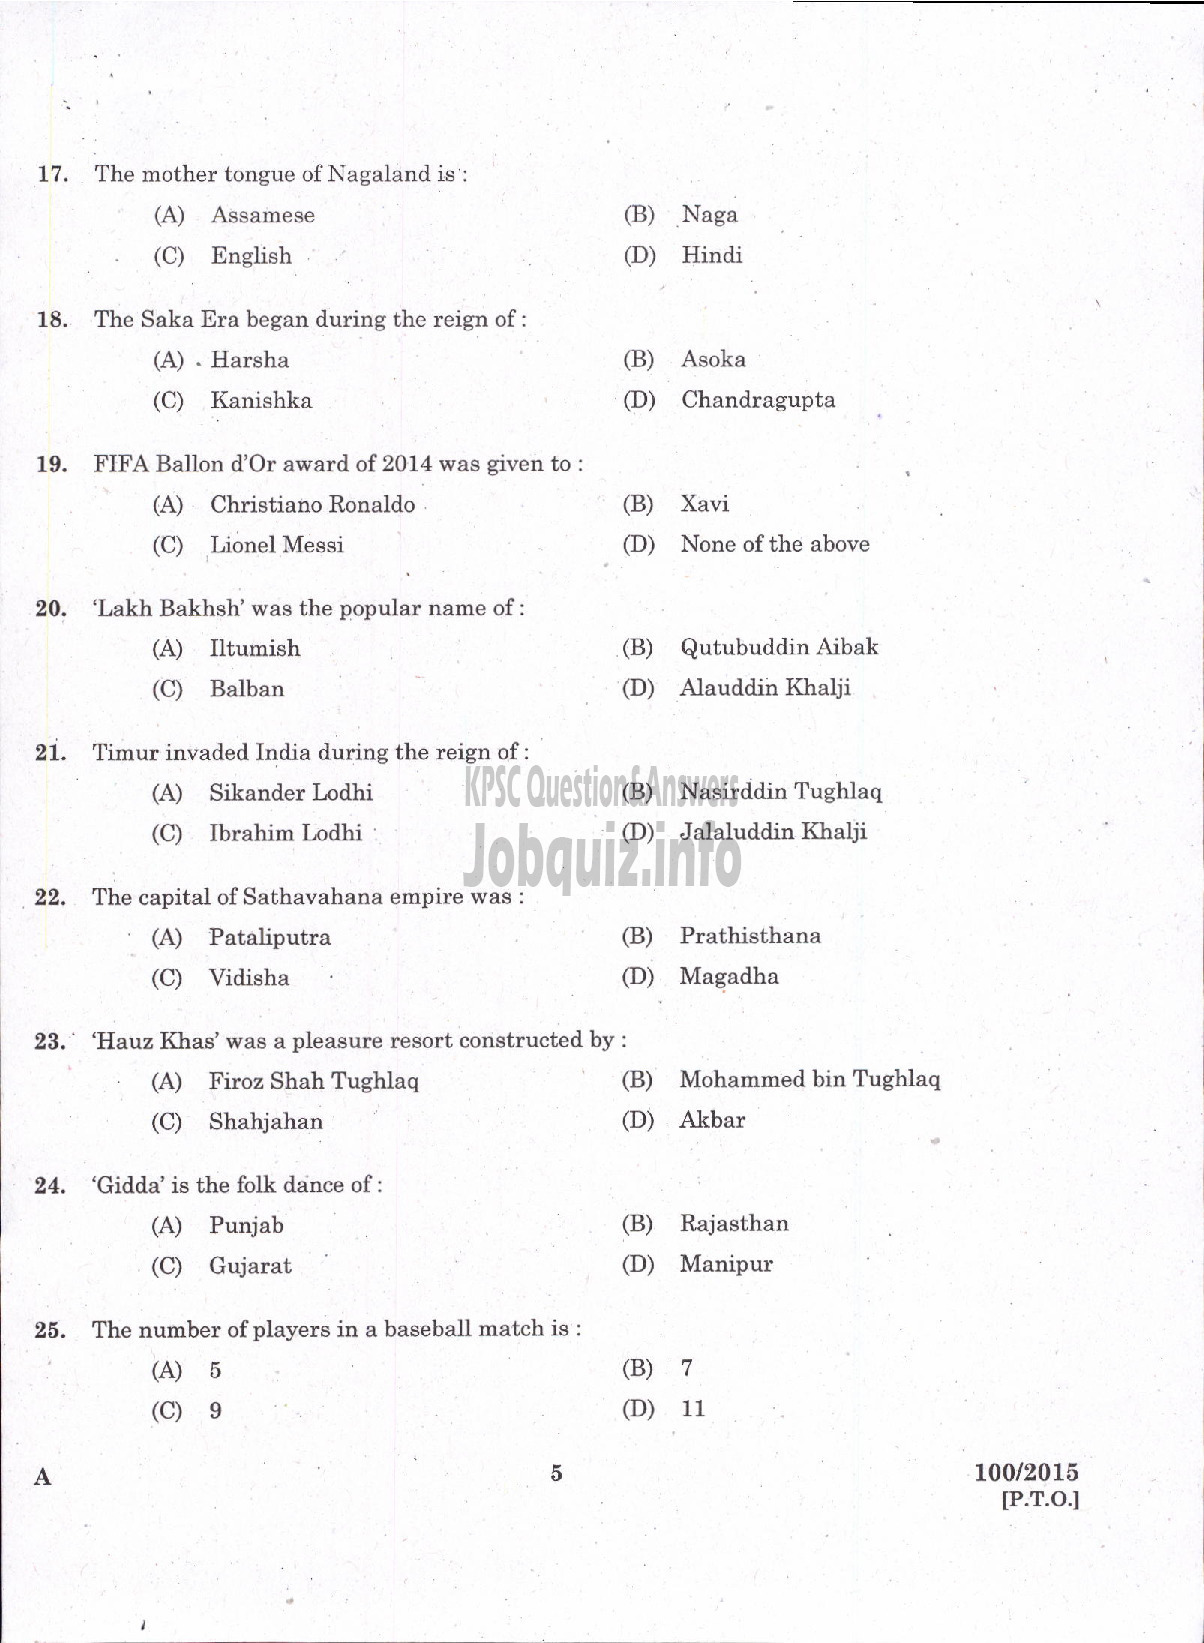 Kerala PSC Question Paper - TYYPIST GRADE II / STENO TYPIST / CLERK TYPIST / TYPIST KERALA STATE HOUSING BOARD / KERALA SHIPPING AND INLAND NAVIGATION CORP LTD / VARIOUS / KERALA ELECTRICAL AND ALLIED ENGINEERING COMPANY LTD-3